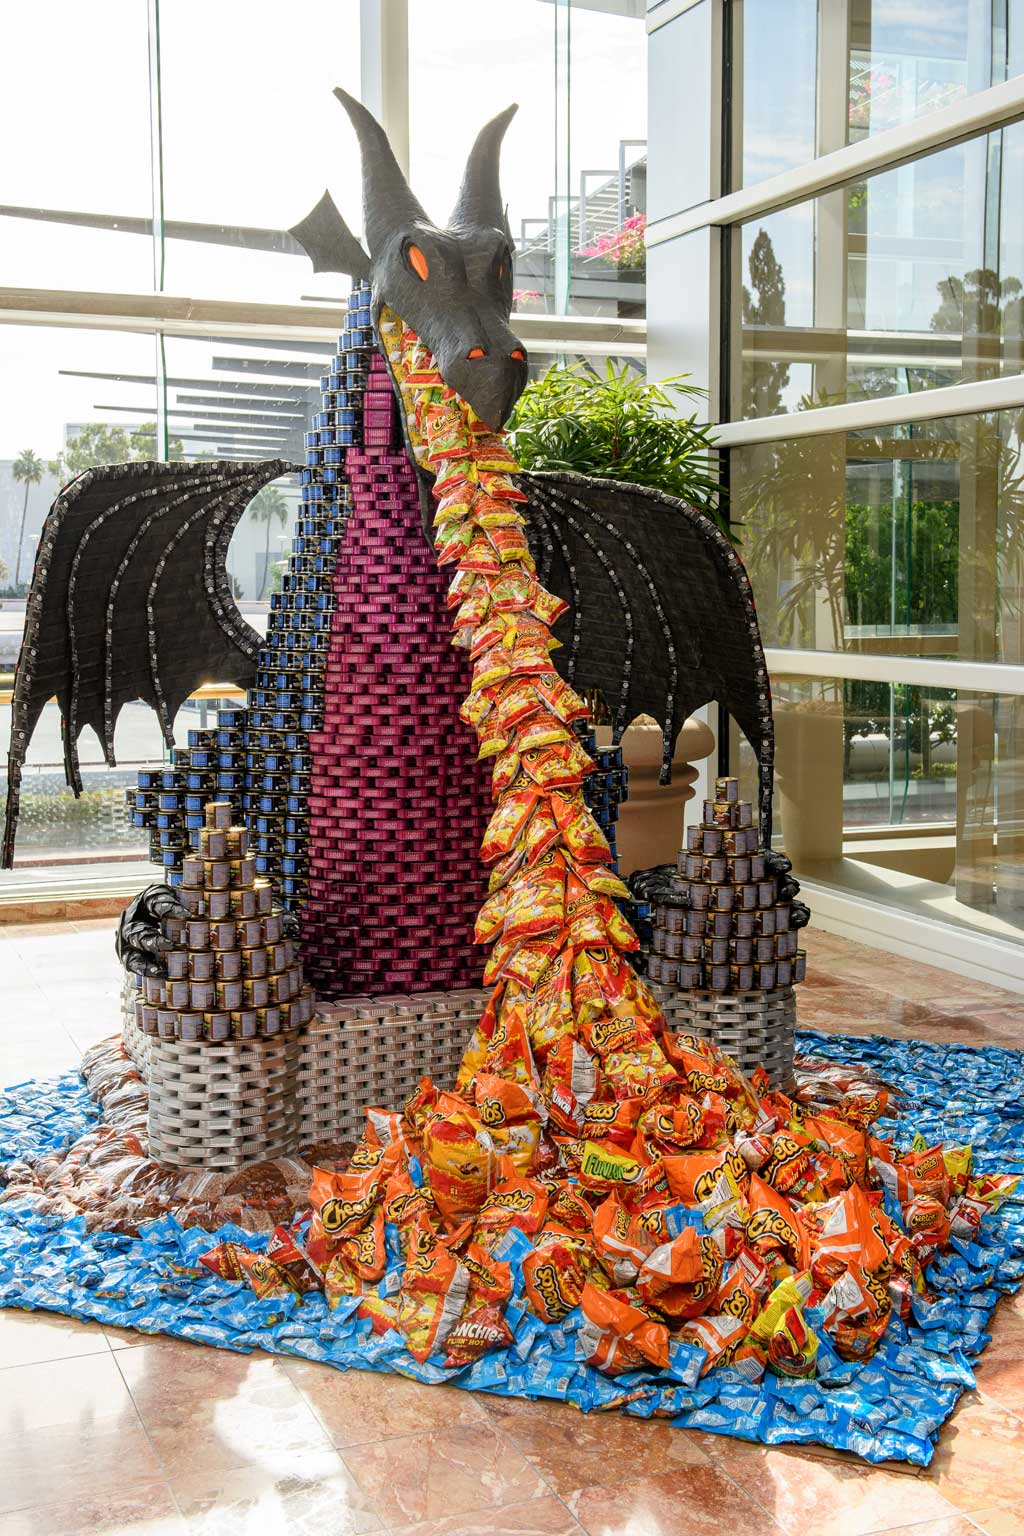 The Disneyland Resort Design and Engineering team brought the Maleficent dragon from the popular nighttime spectacular “Fantasmic!” to life by creating a 10-foot character overnight from 5,250 canned goods at the 10th anniversary of CANstruction Orange County.